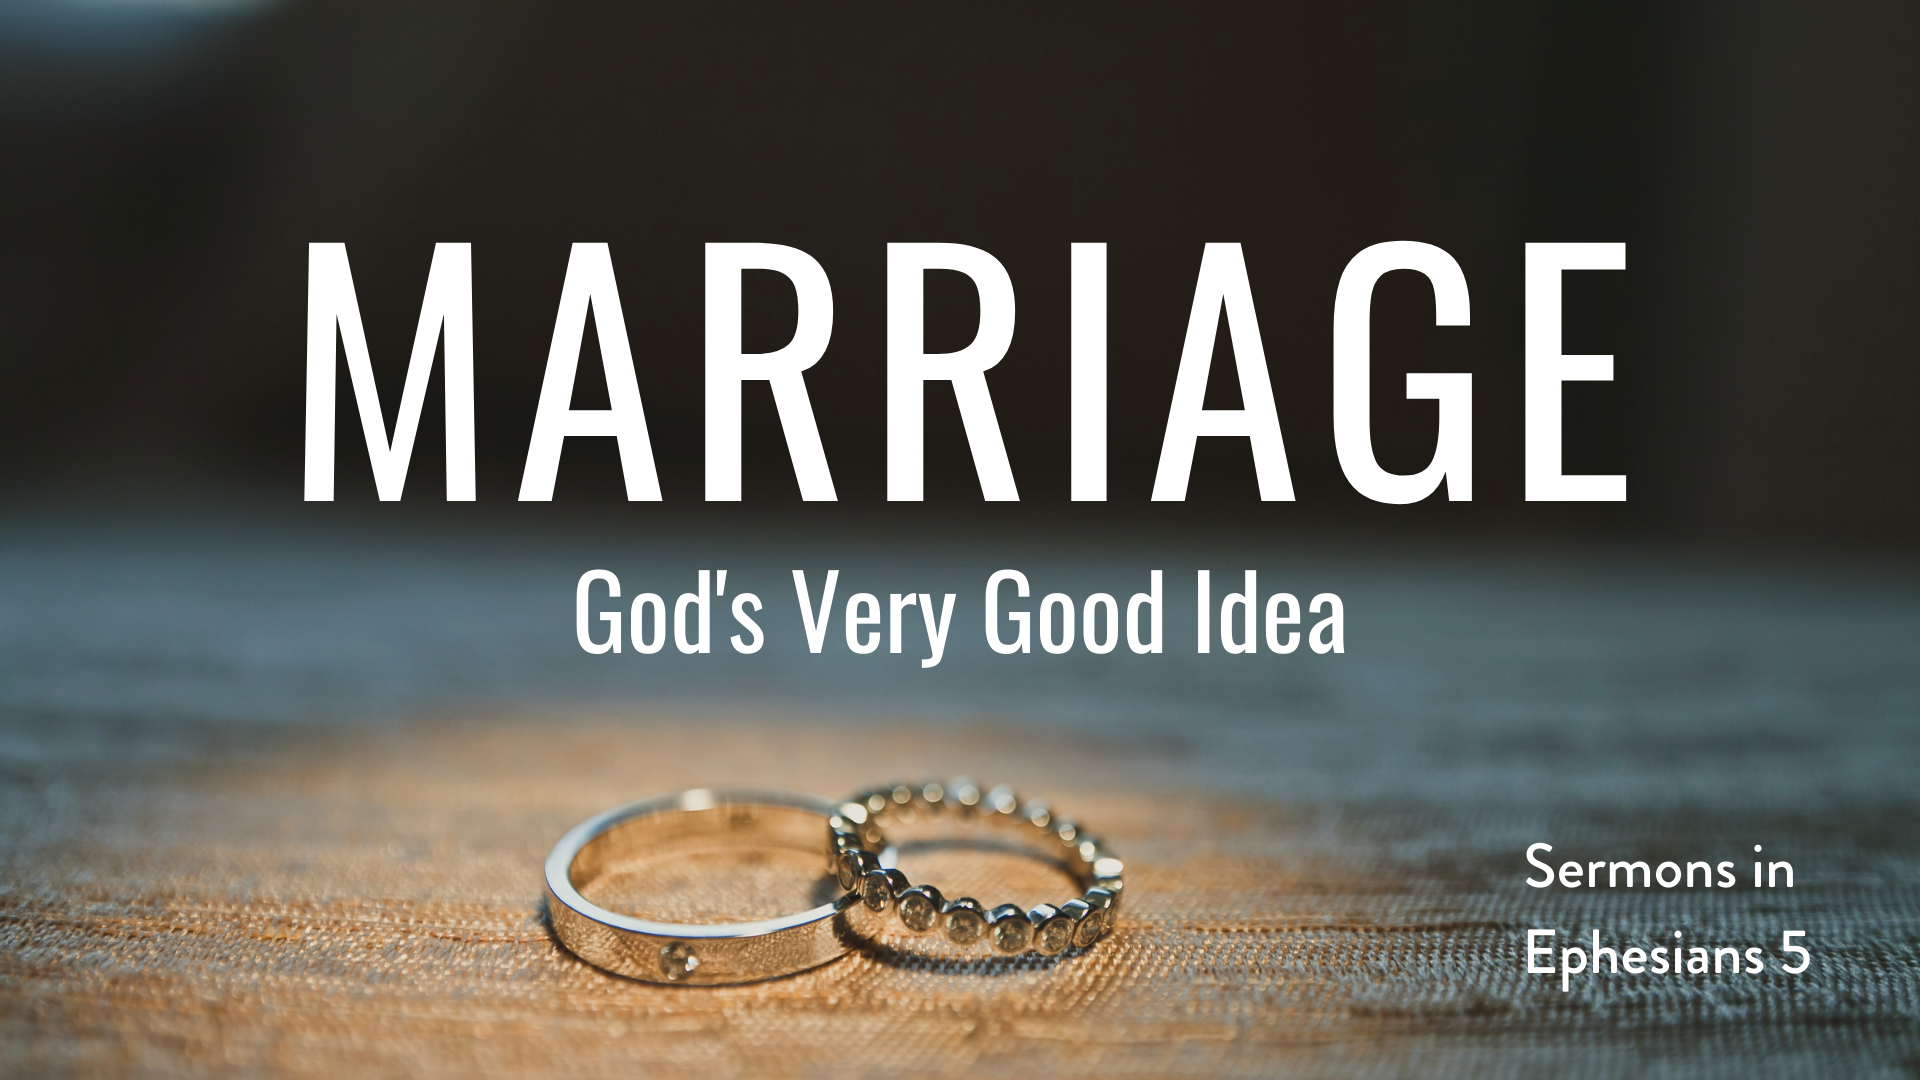 Biblical Marriage: Complementary